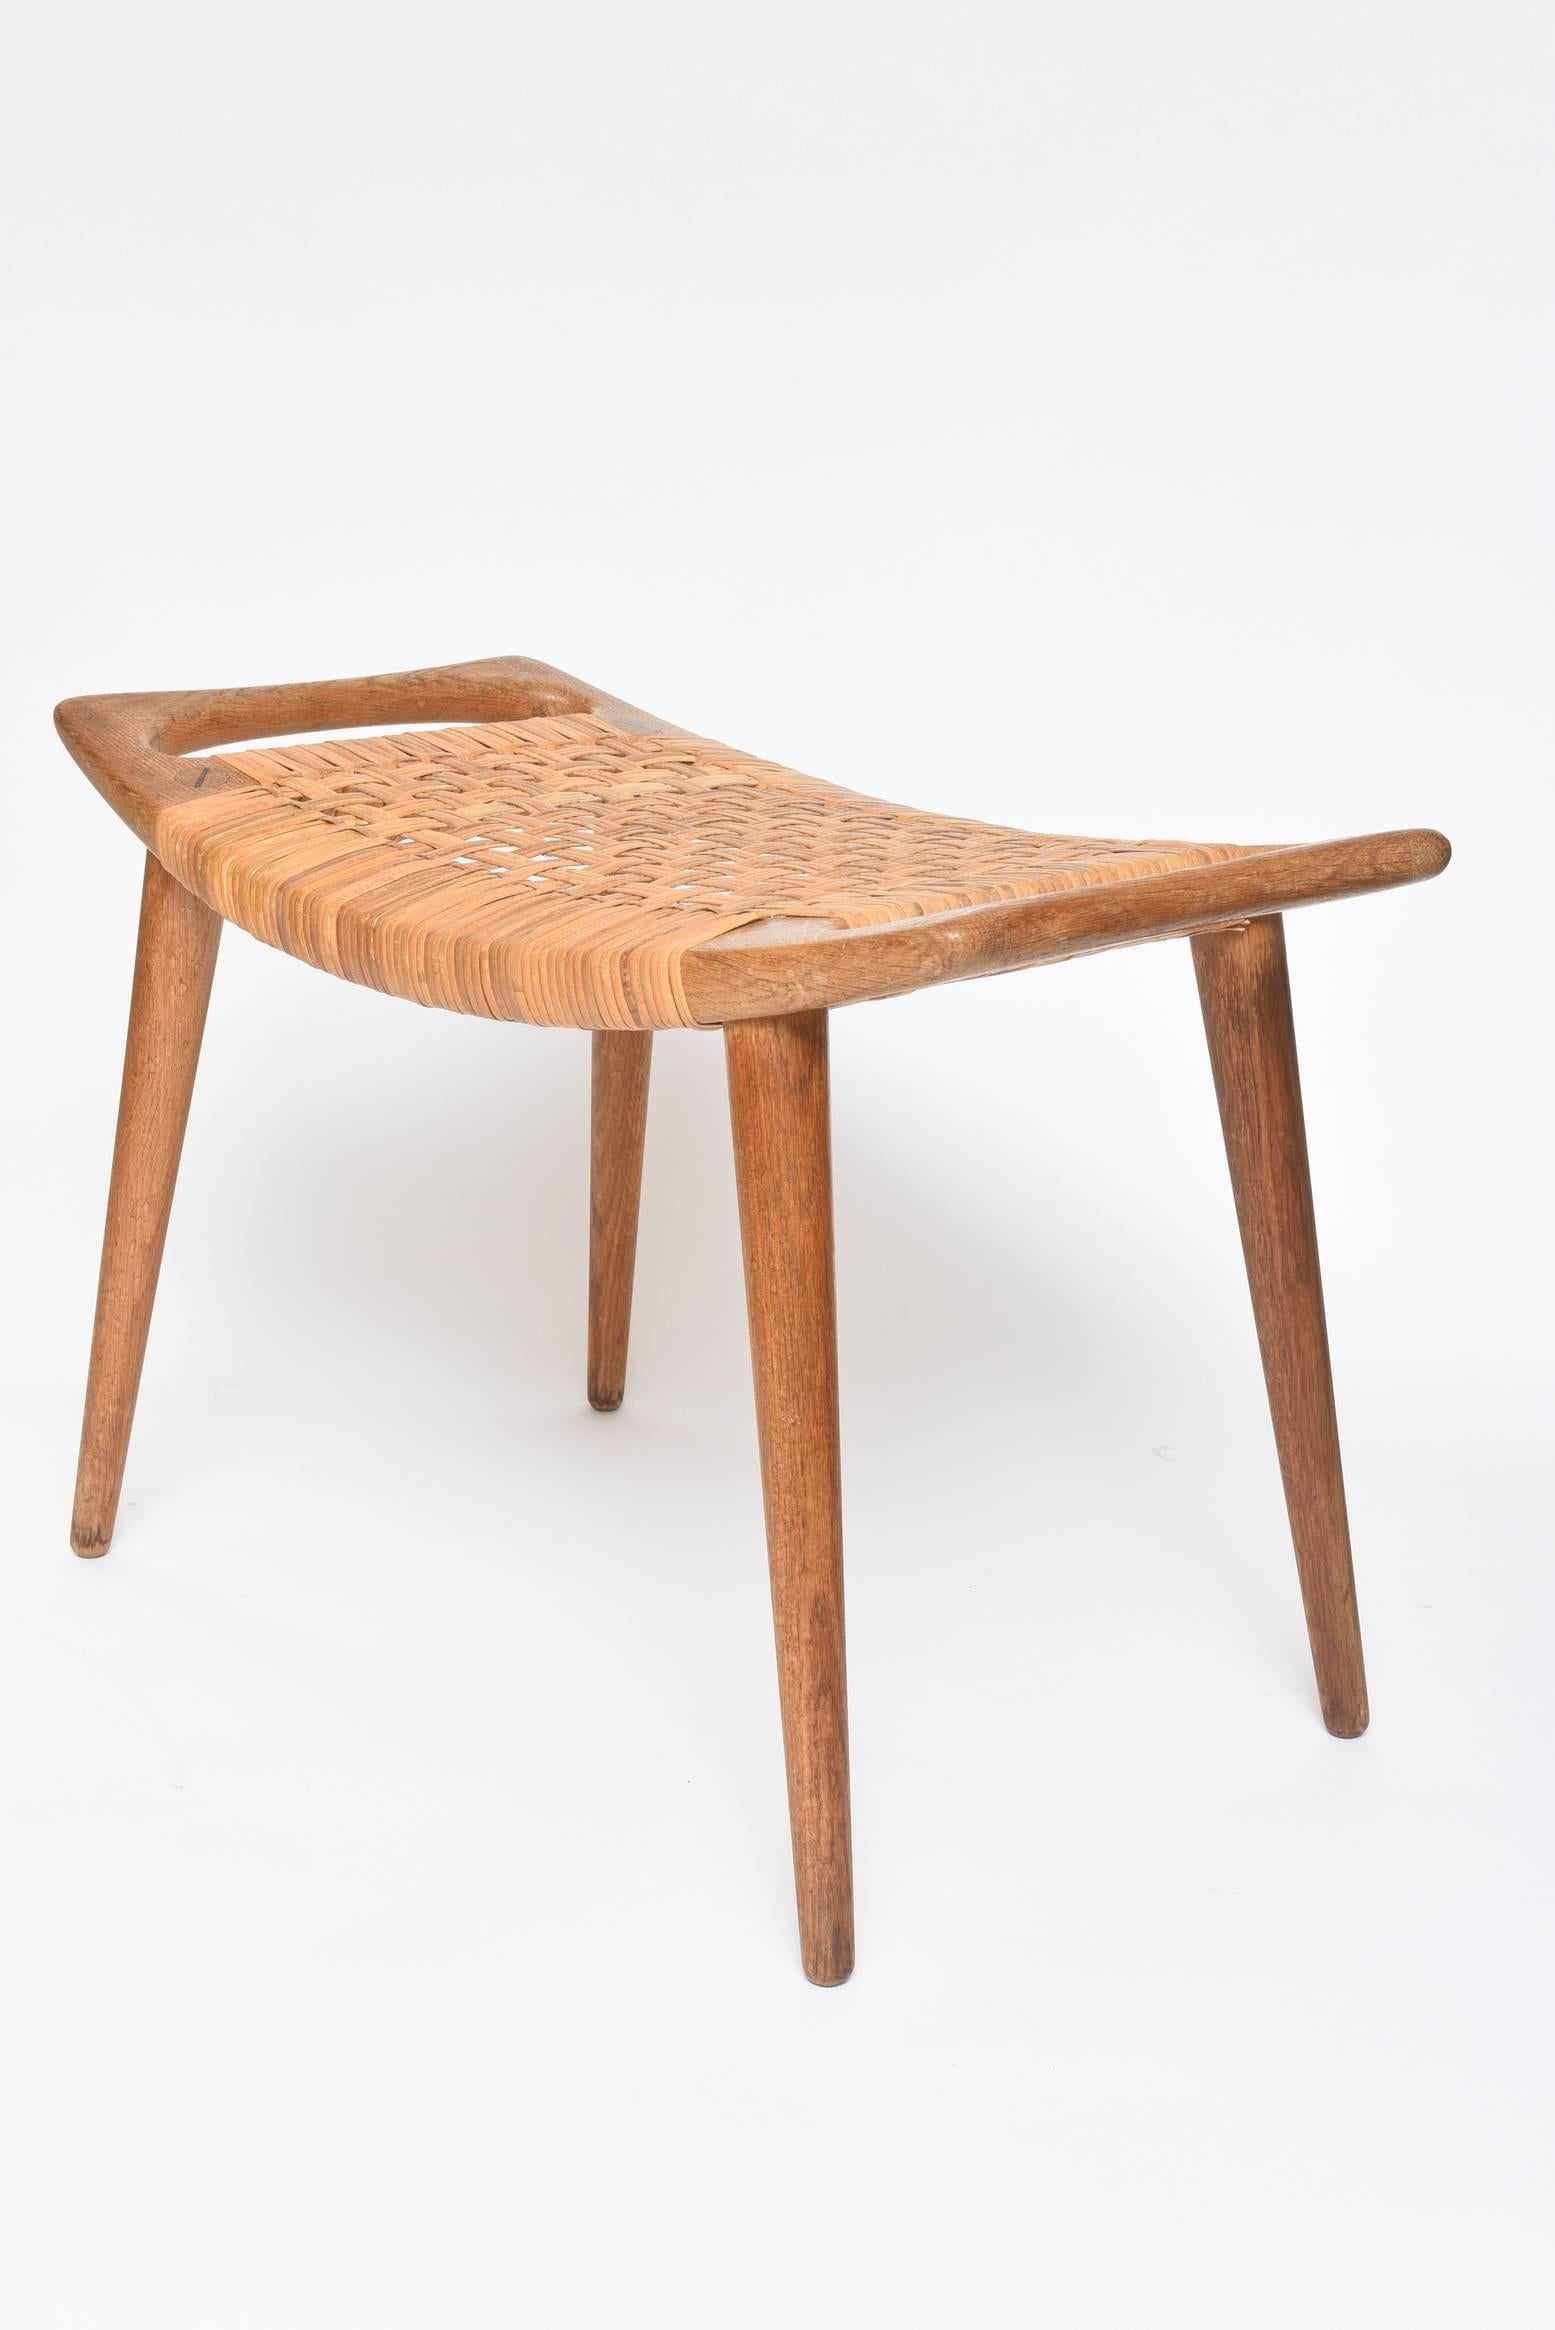 Hans Wegner Woven Cane Bench or Stool In Good Condition For Sale In West Palm Beach, FL